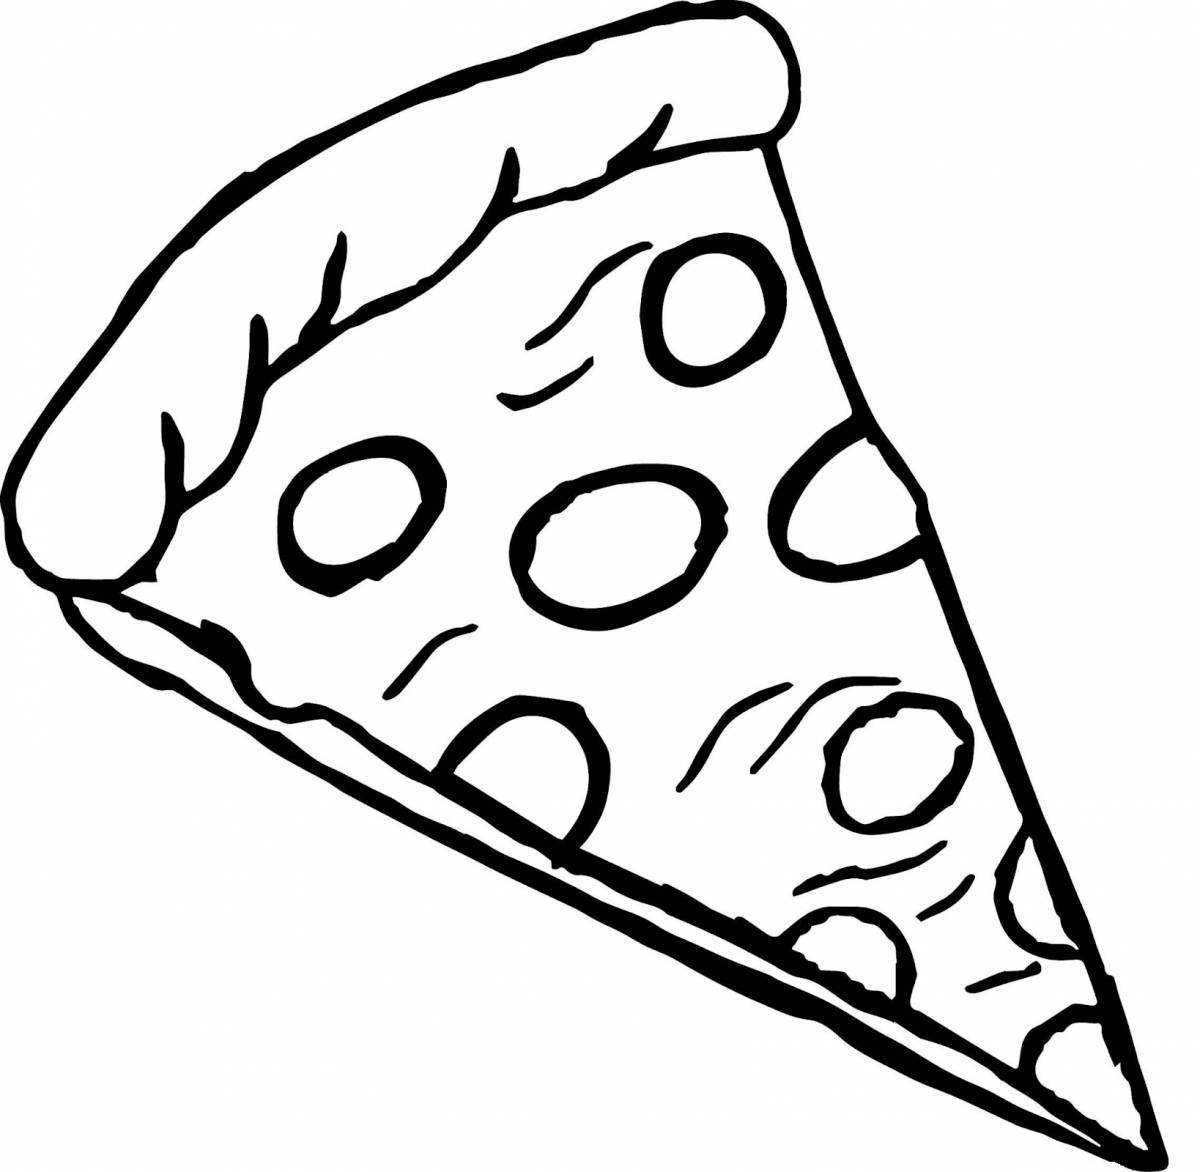 Pizza teasing coloring page